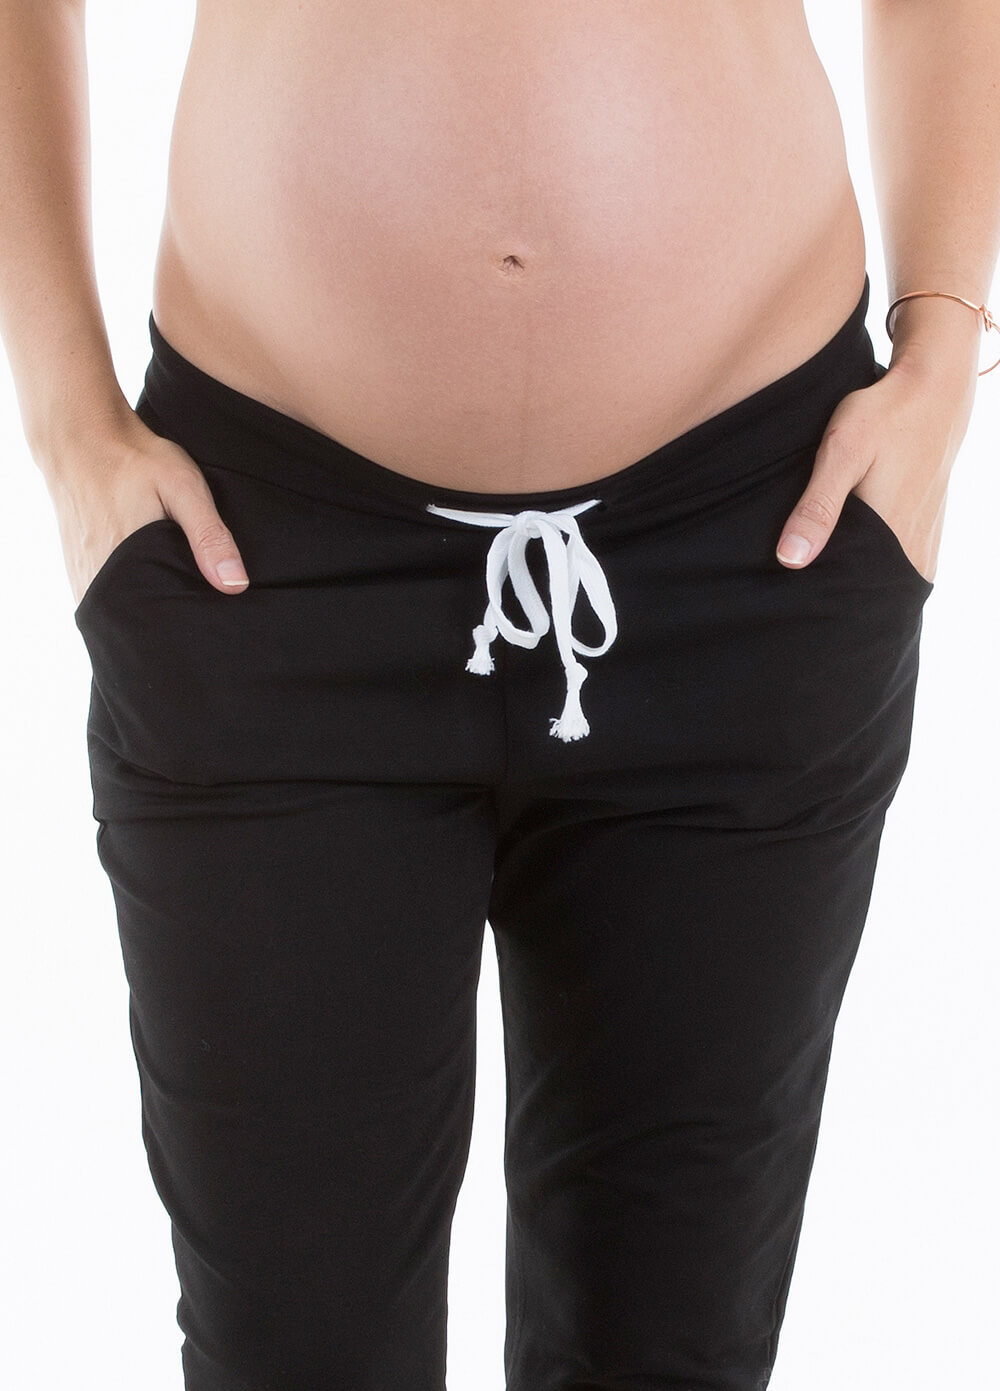 Myles Maternity Jogger Pants in Black by Trimester